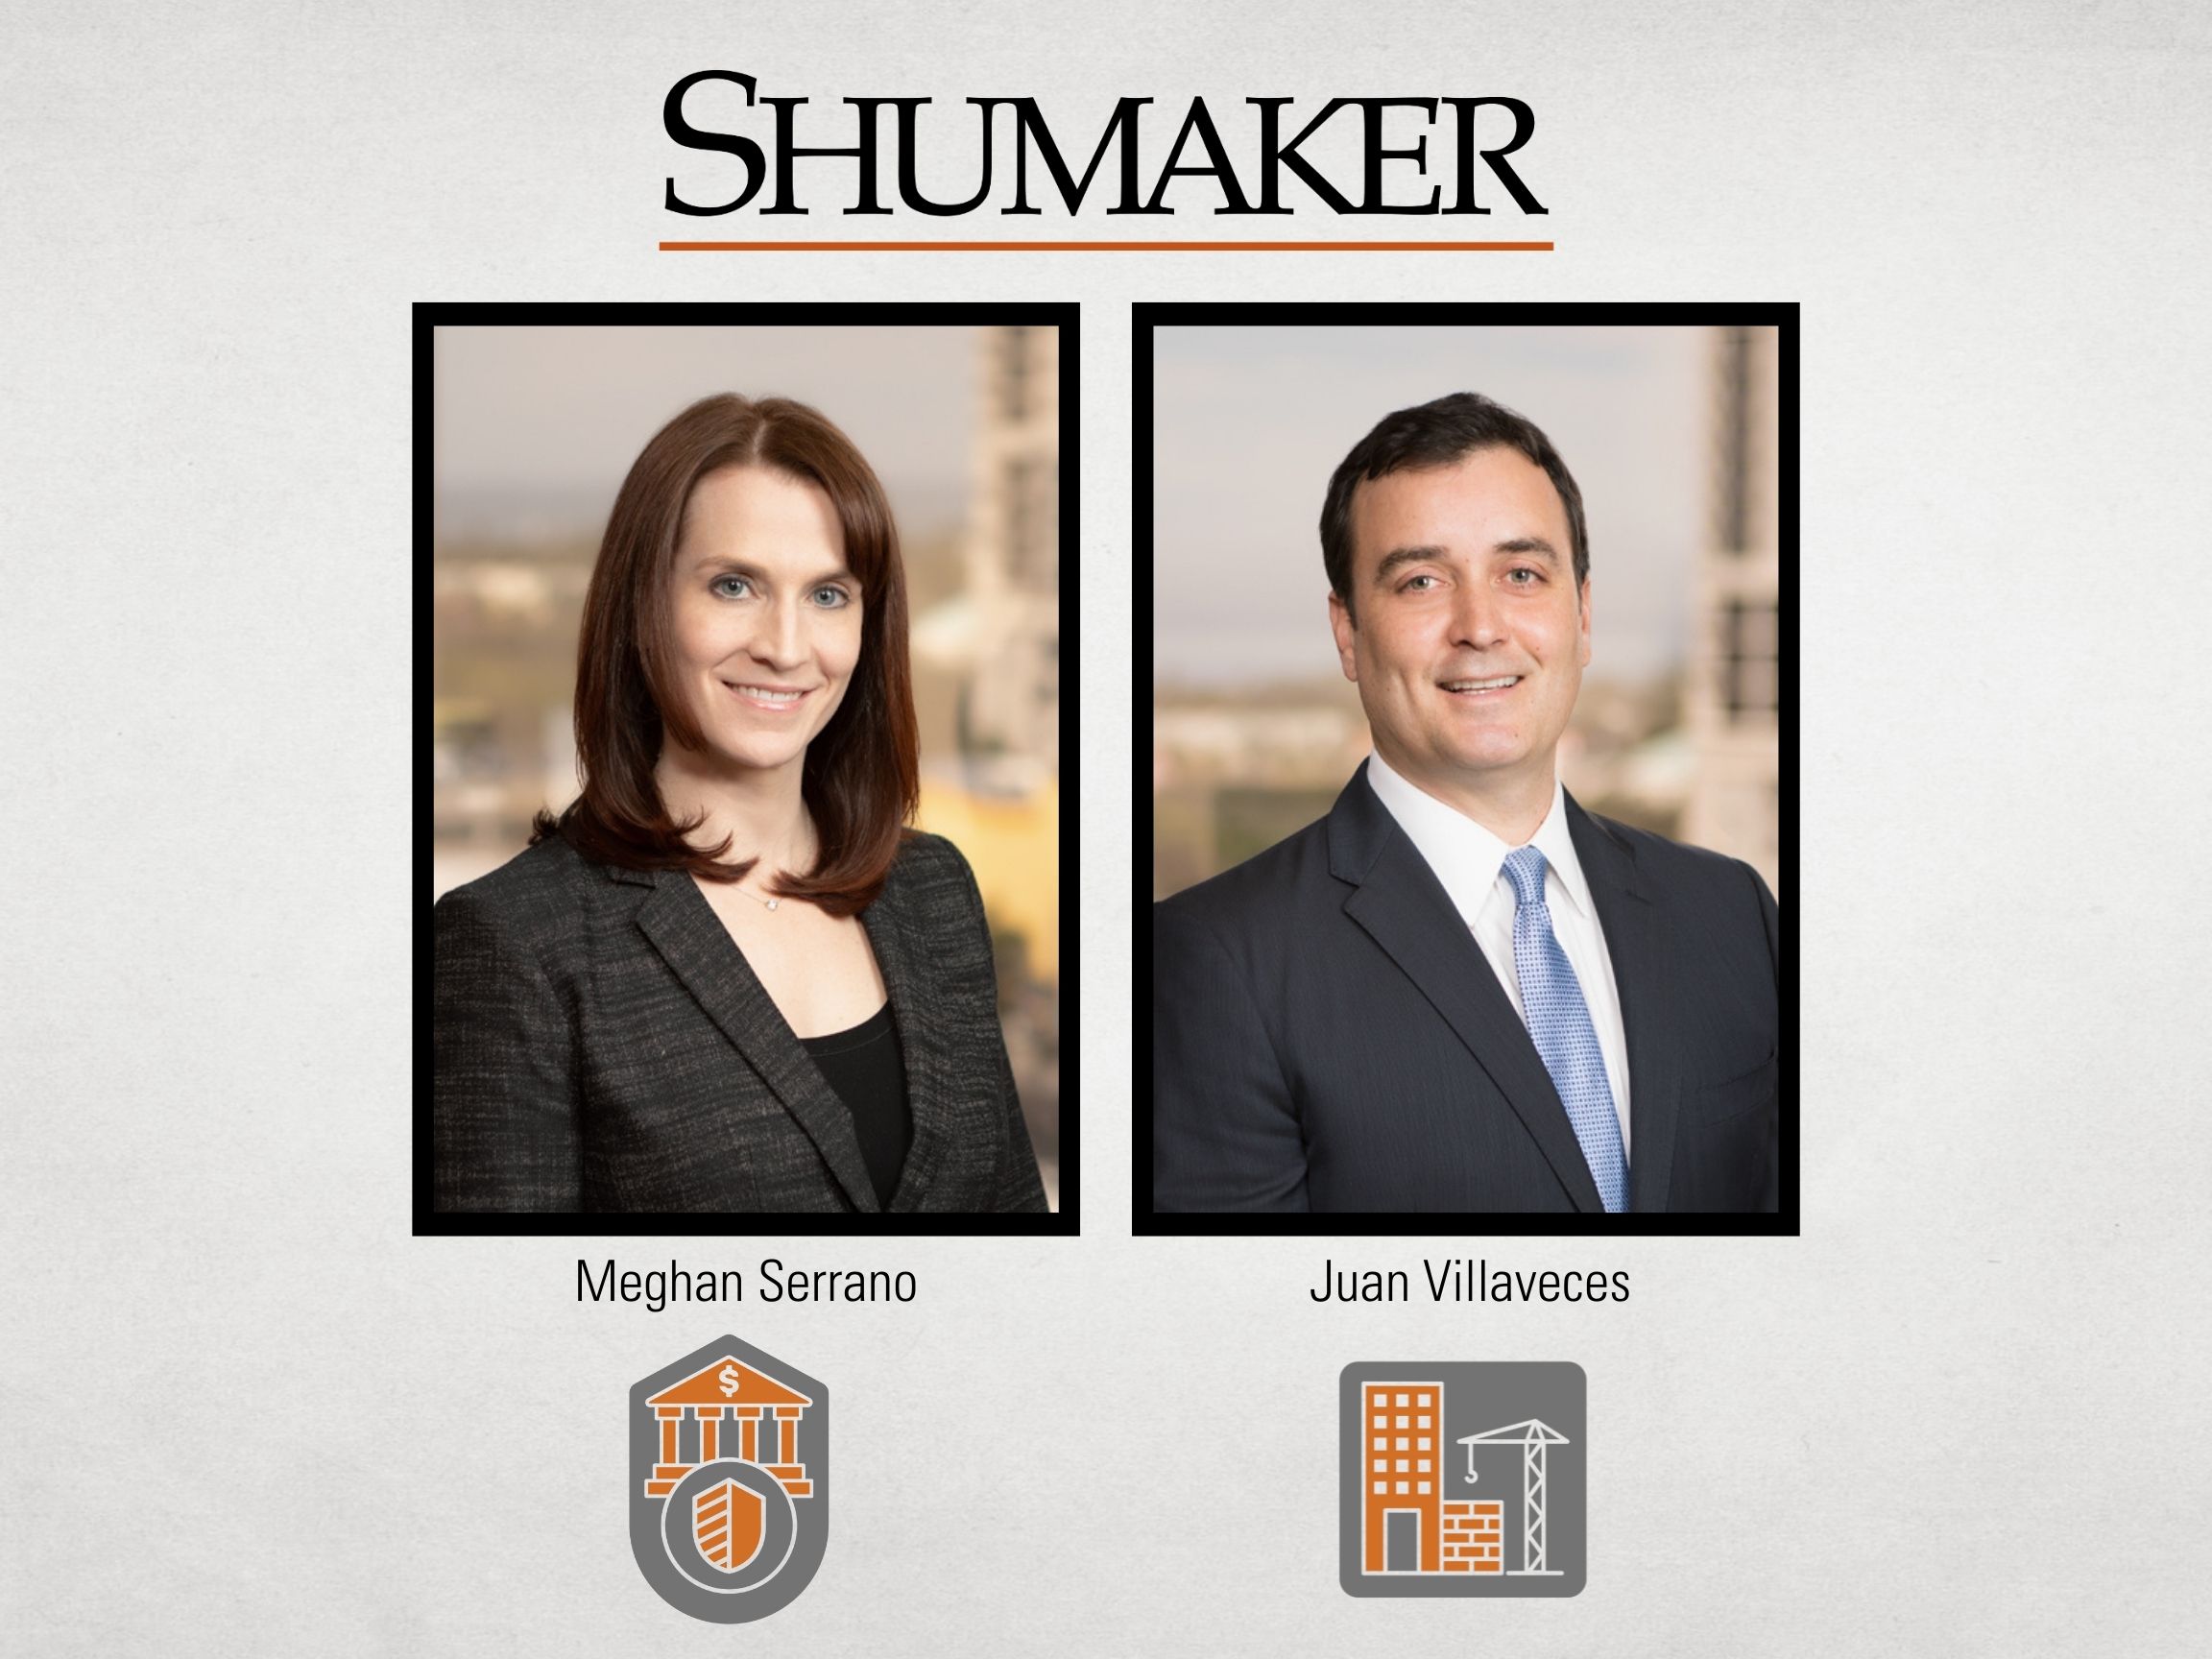 Shumaker Names Two Sarasota Attorneys to Lead Fast-Growing Real Estate and Finance Business Sectors